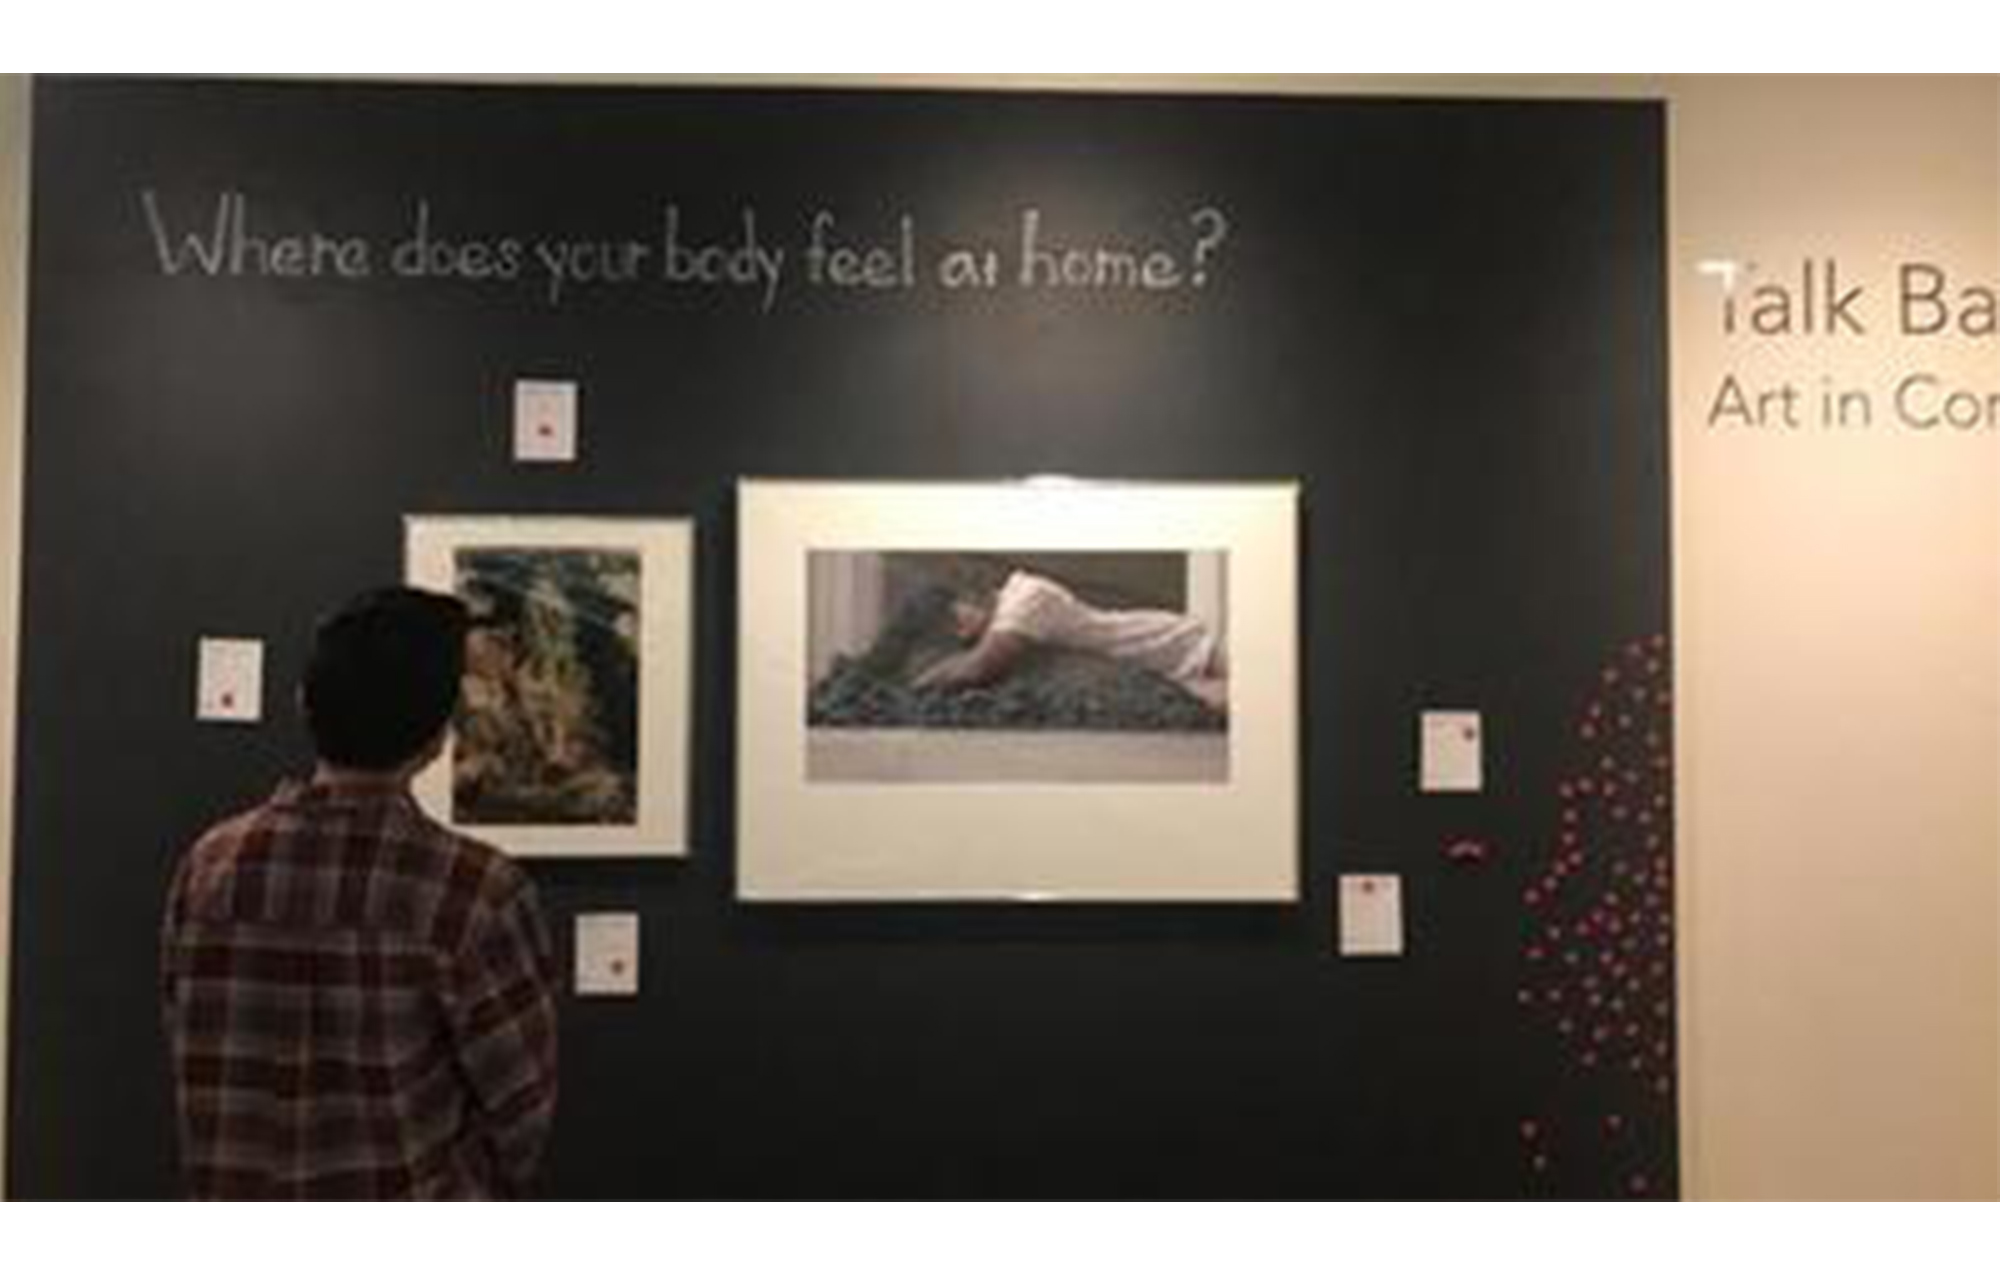 a person stands facing a black wall, on which two prints are displayed underneath the prompt, "where does your body feel at home?"